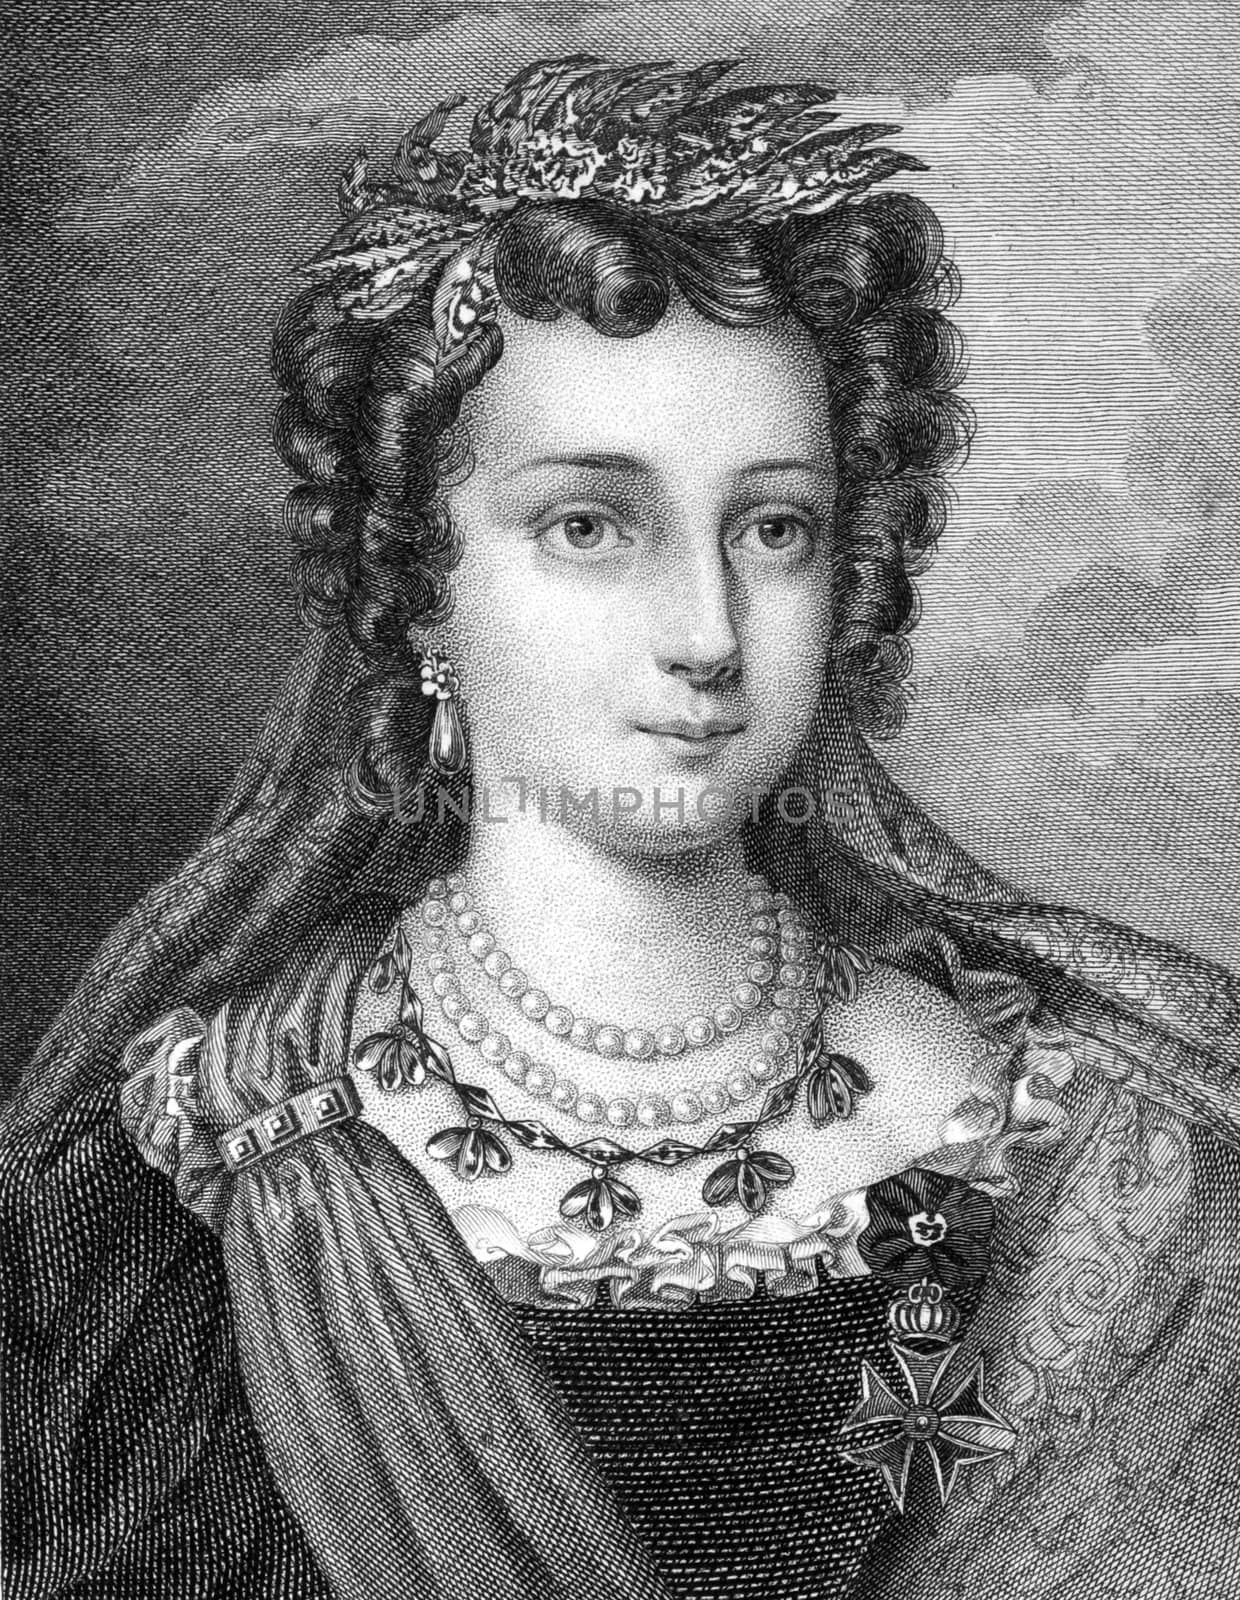 Maria II of Portugal (1819-1853) on engraving from 1859.  Queen regnant of Portugal during 1826-1828 and 1834- 1853. Engraved by unknown artist and published in Meyers Konversations-Lexikon, Germany,1859.